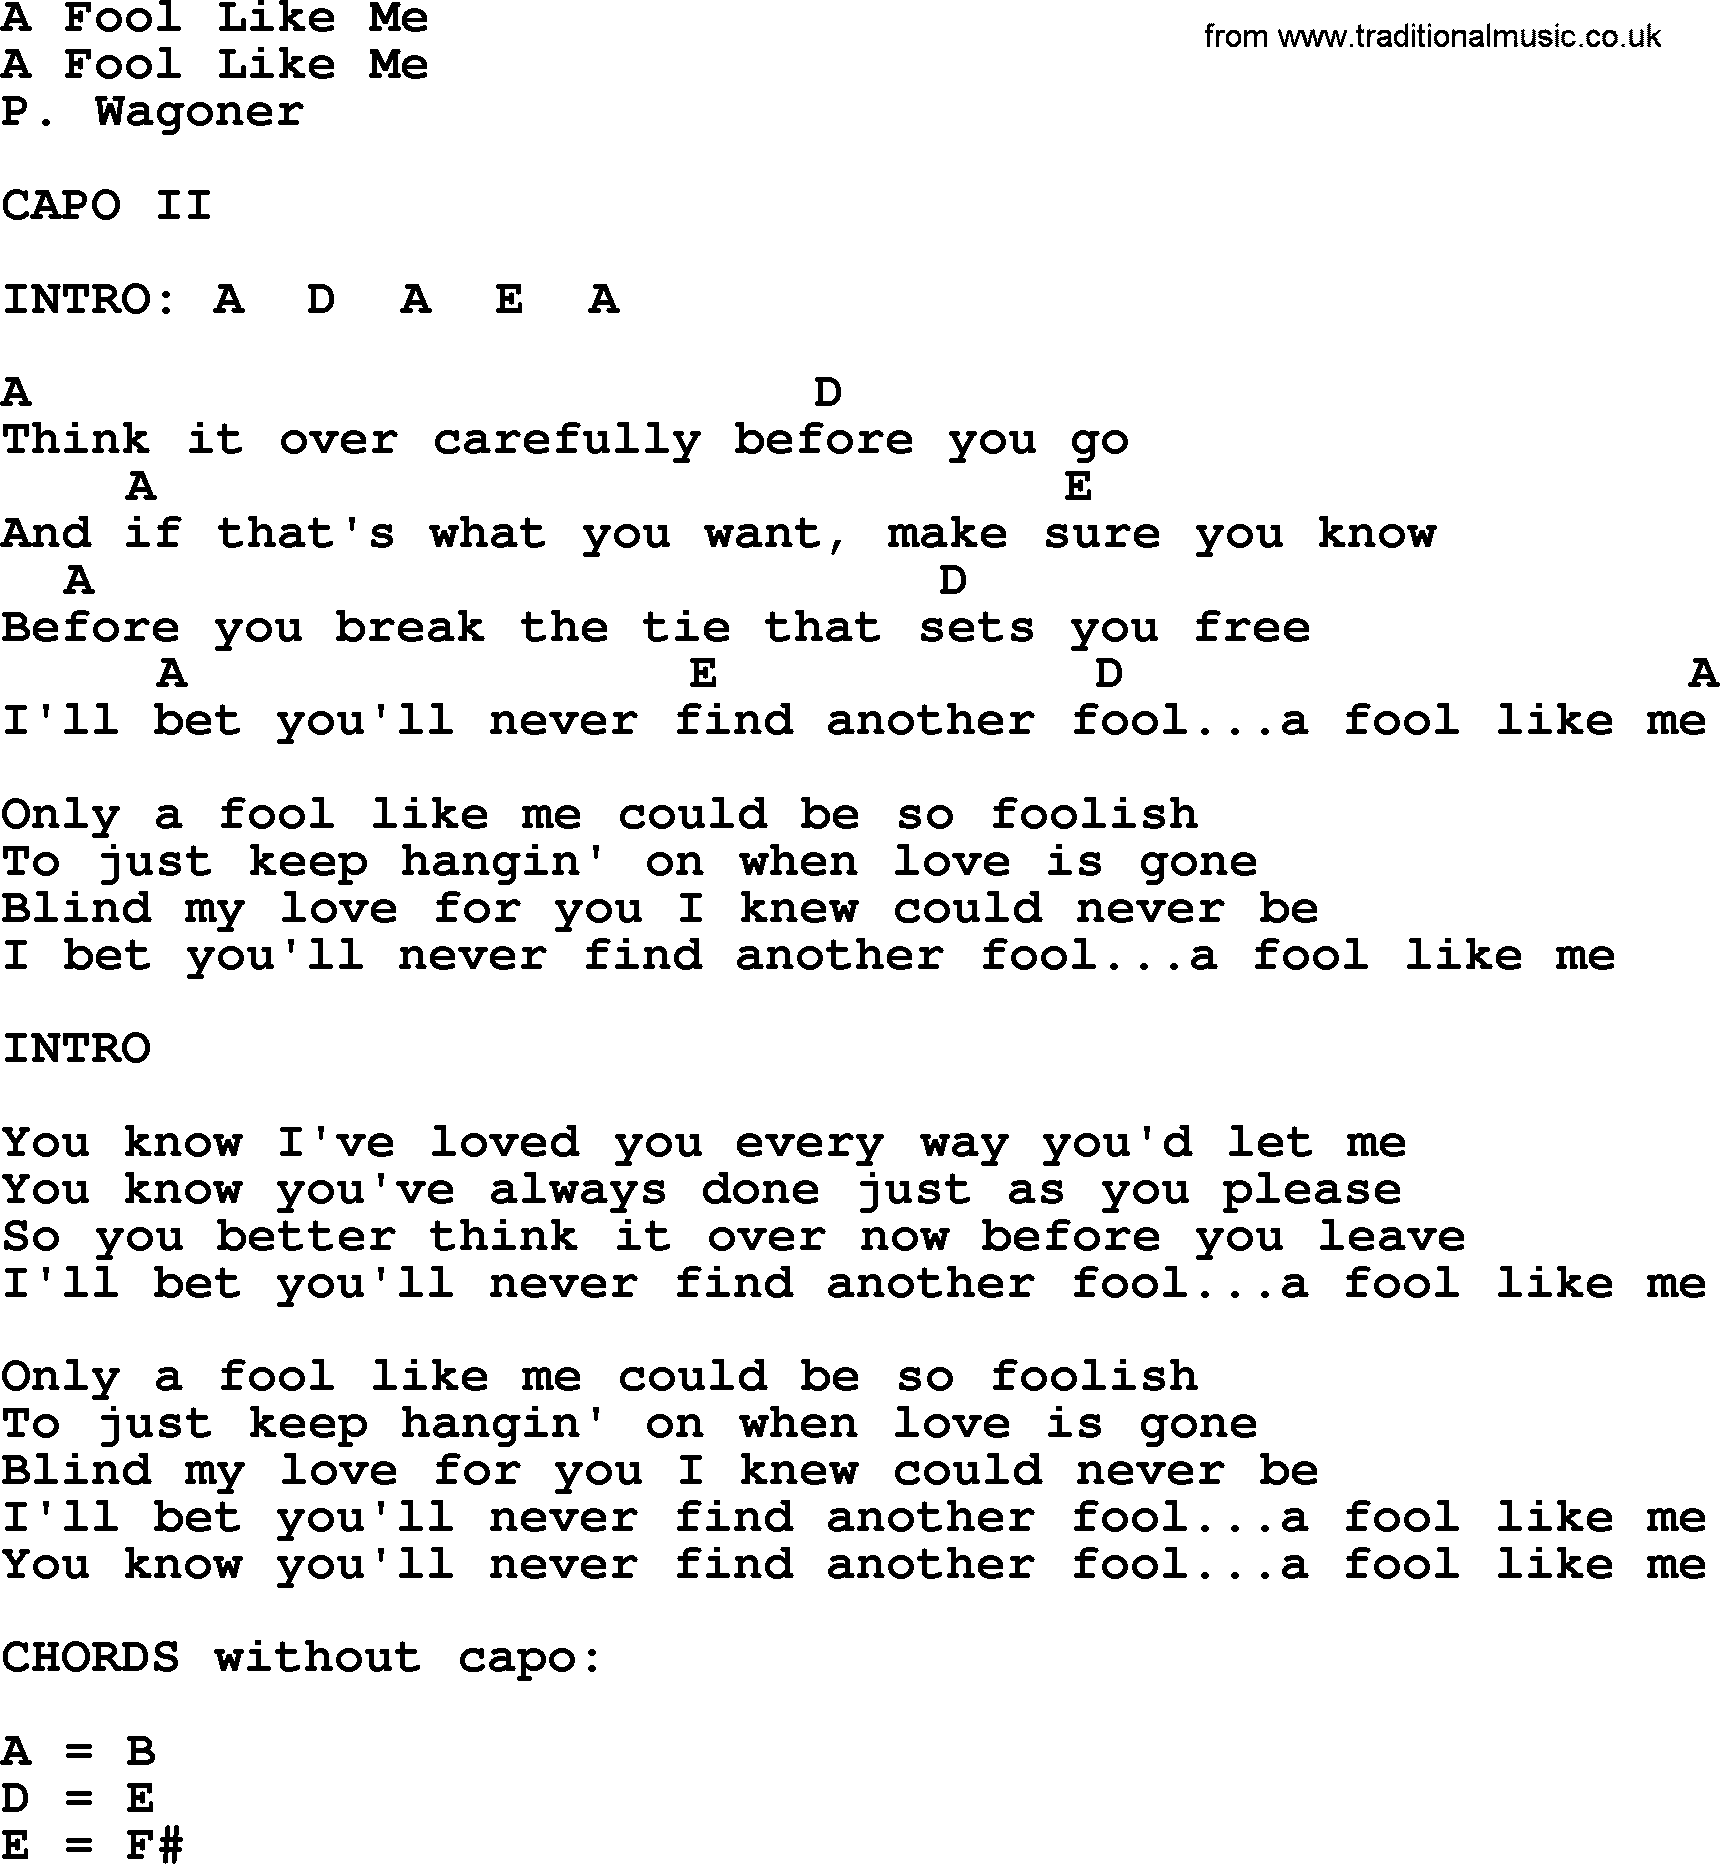 Bluegrass song: A Fool Like Me, lyrics and chords